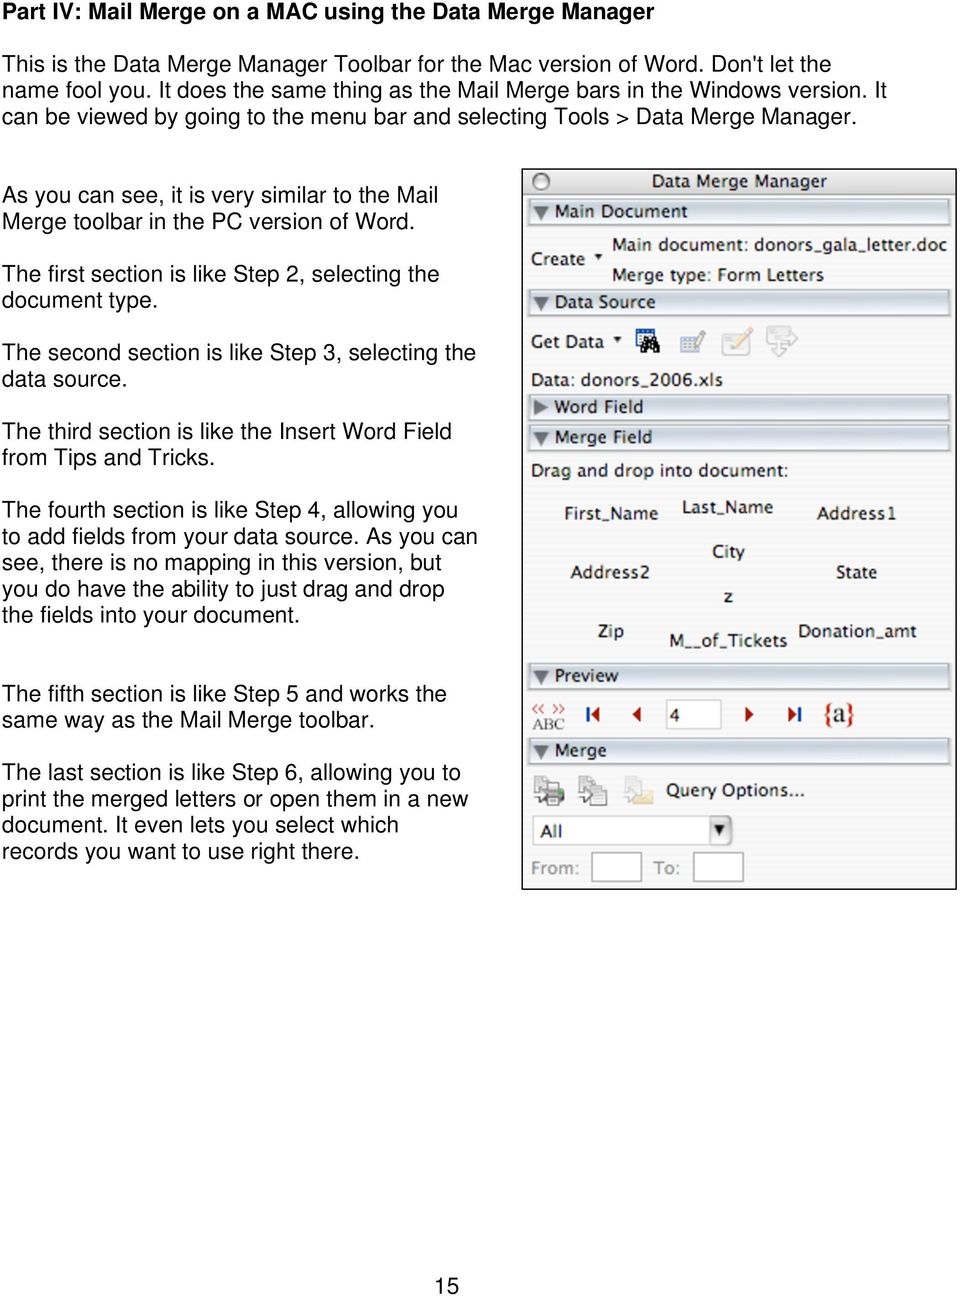 As you can see, it is very similar to the Mail Merge toolbar in the PC version of Word. The first section is like Step 2, selecting the document type.